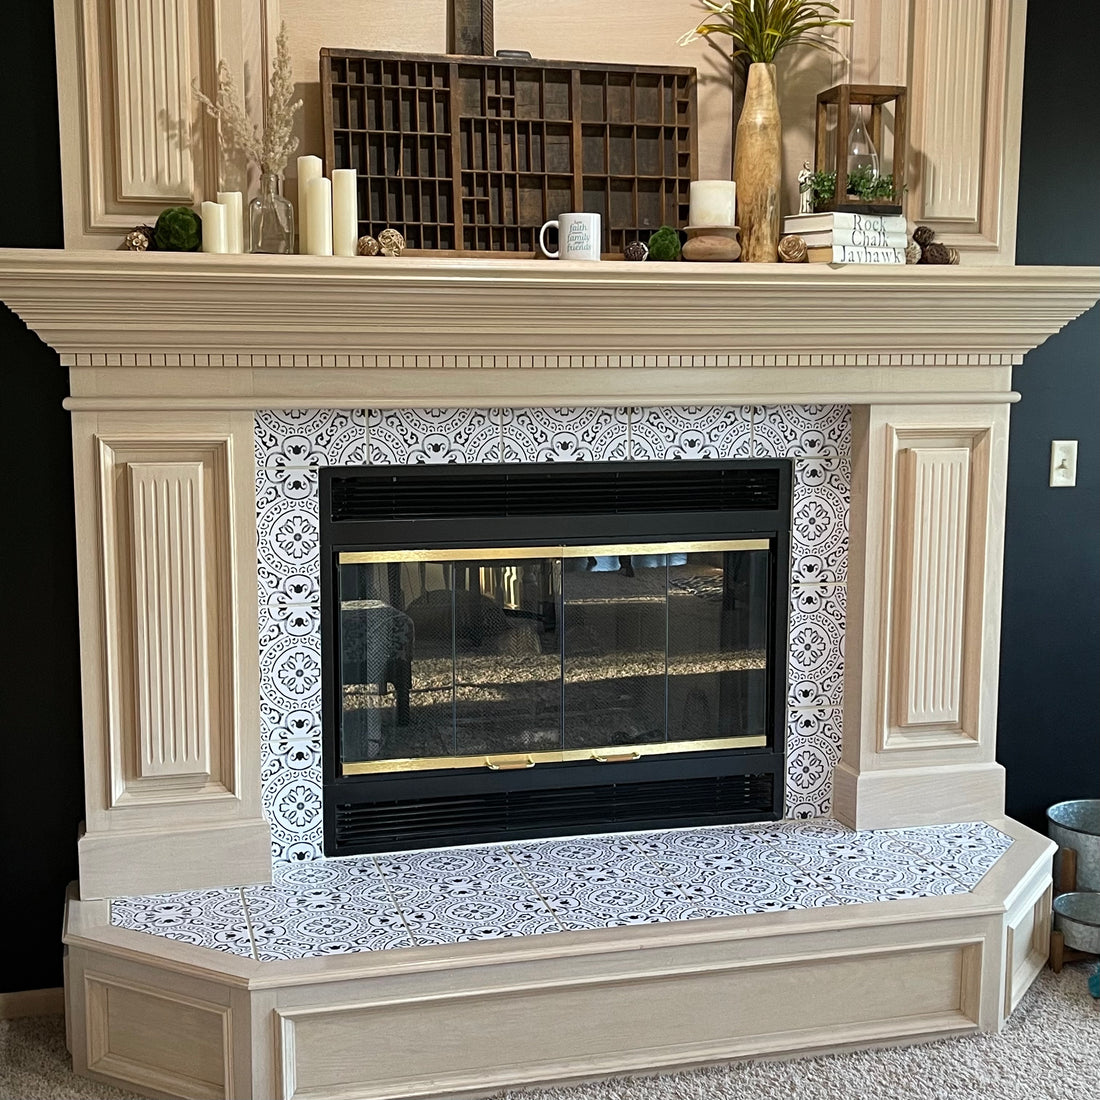 Easy fireplace tile update!